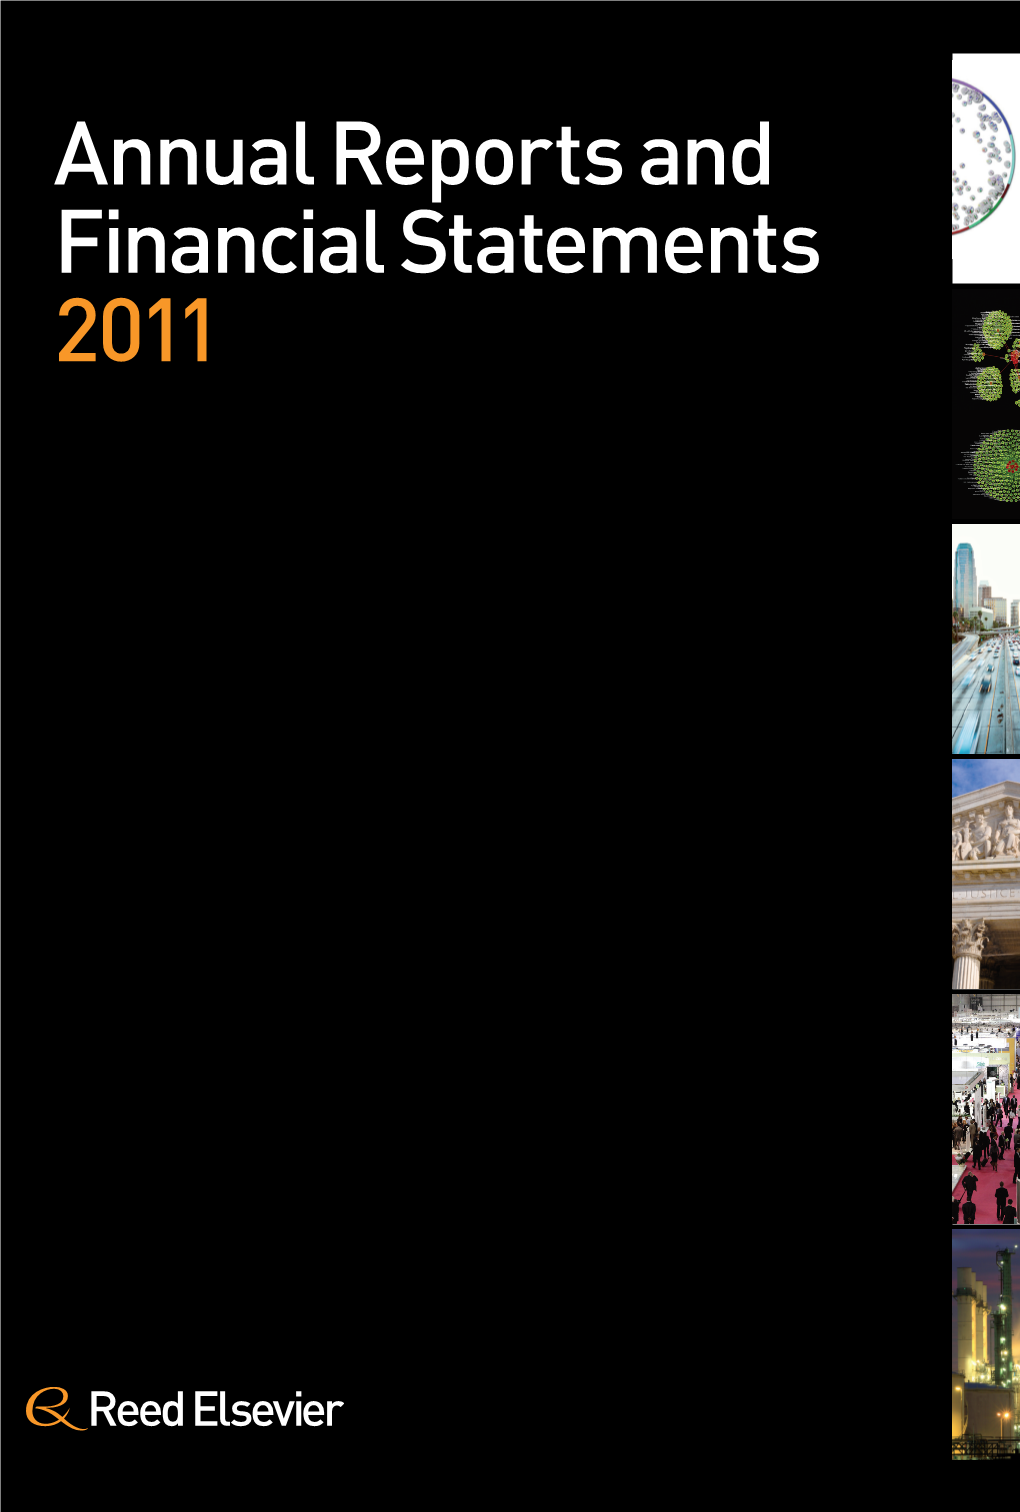 RELX Group Annual Reports and Financial Statements 2011